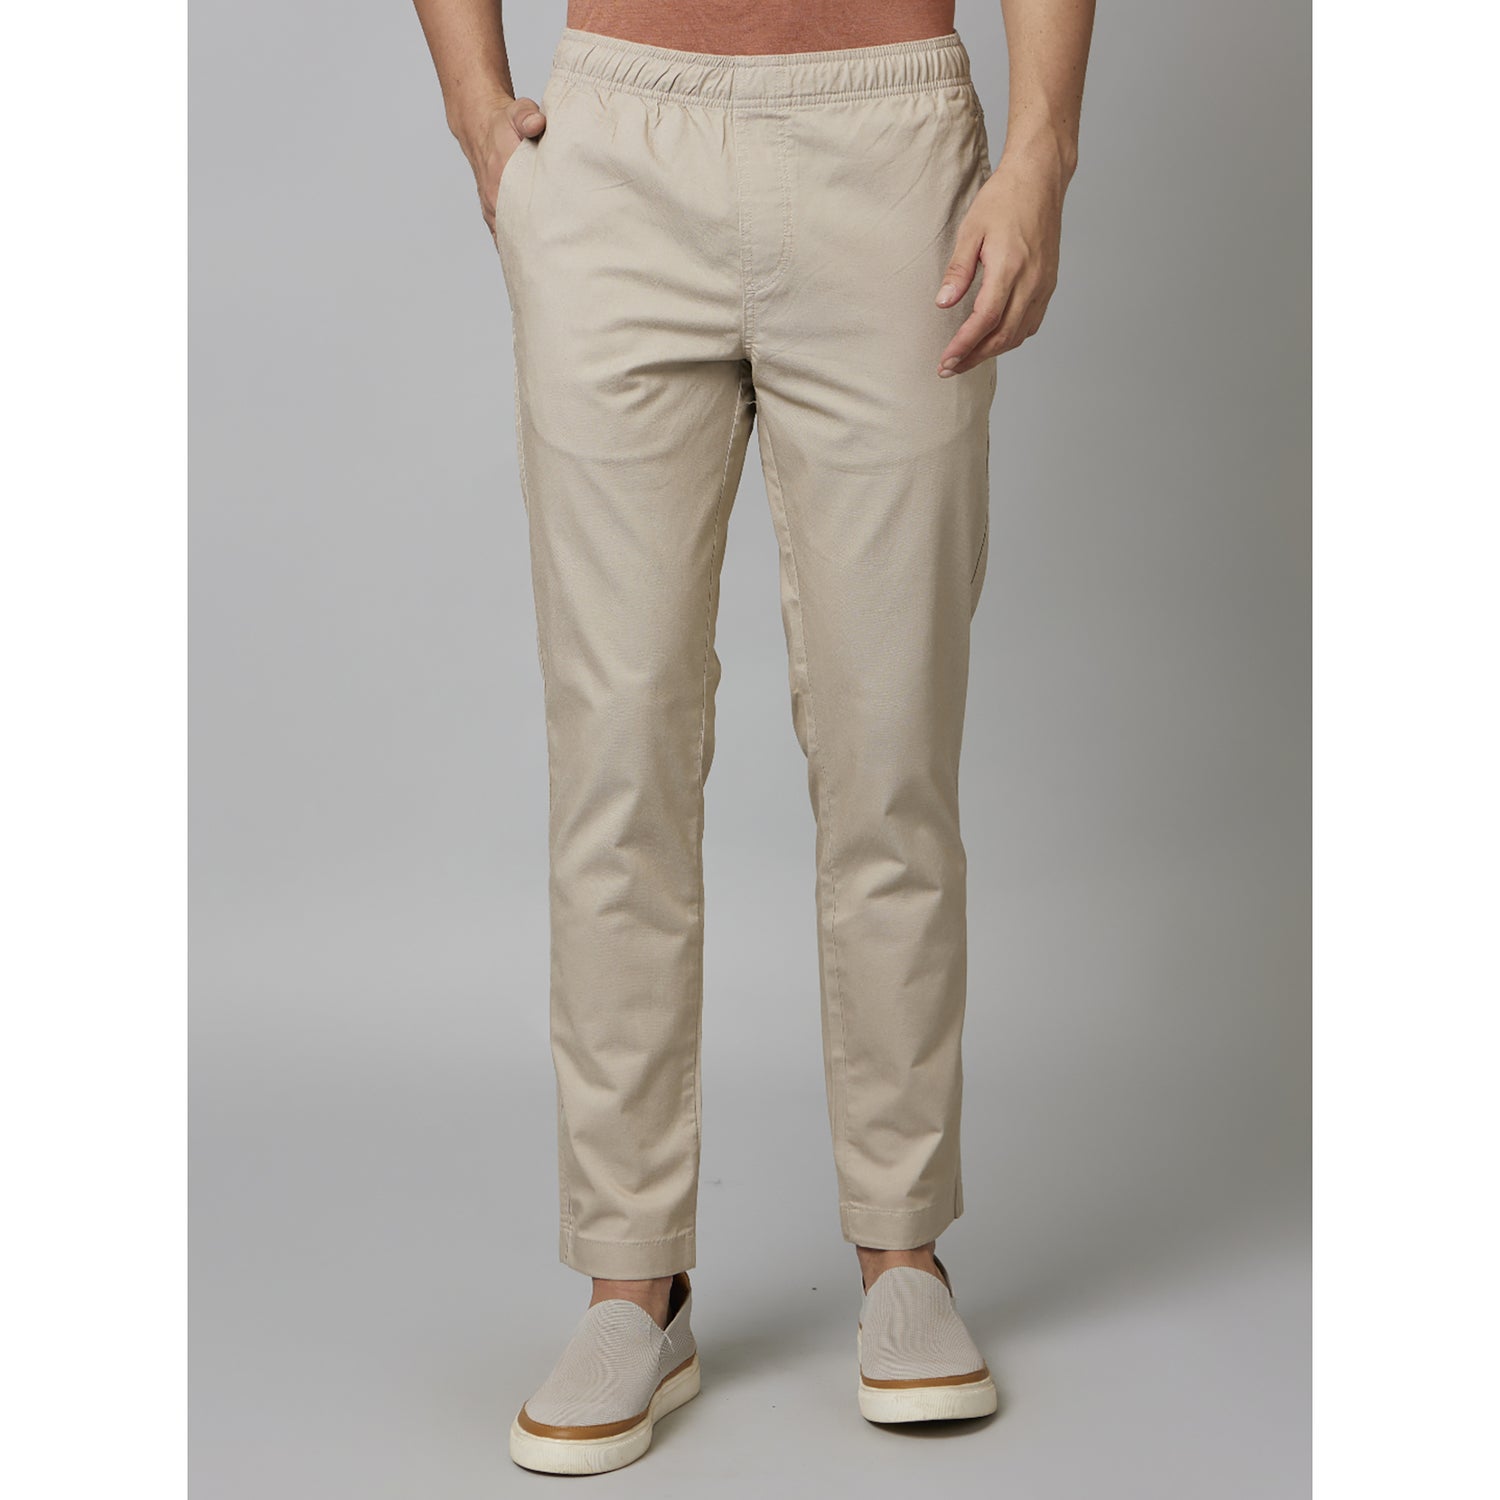 Beige Solid Cotton Poly Blend Trousers (DOMAX5)